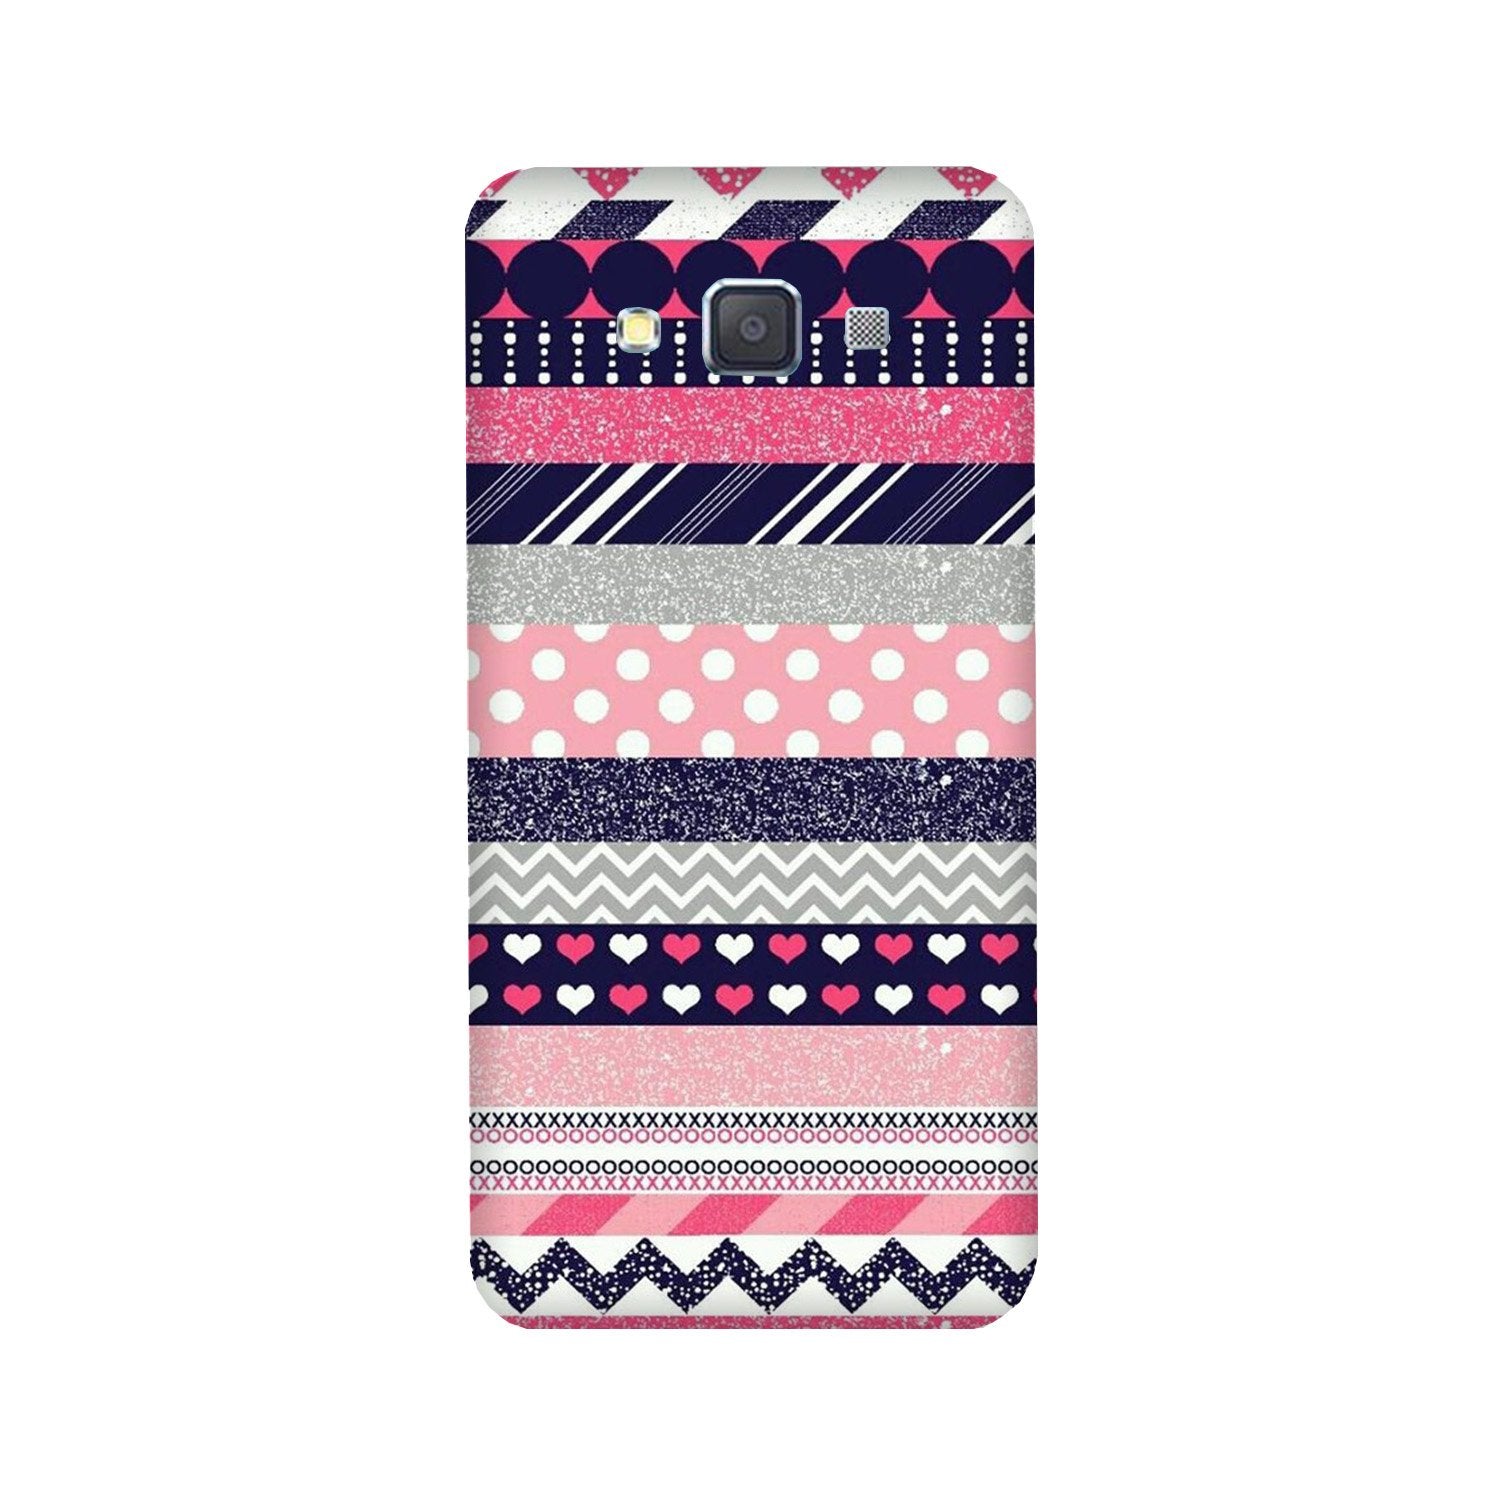 Pattern3 Case for Galaxy Grand Max